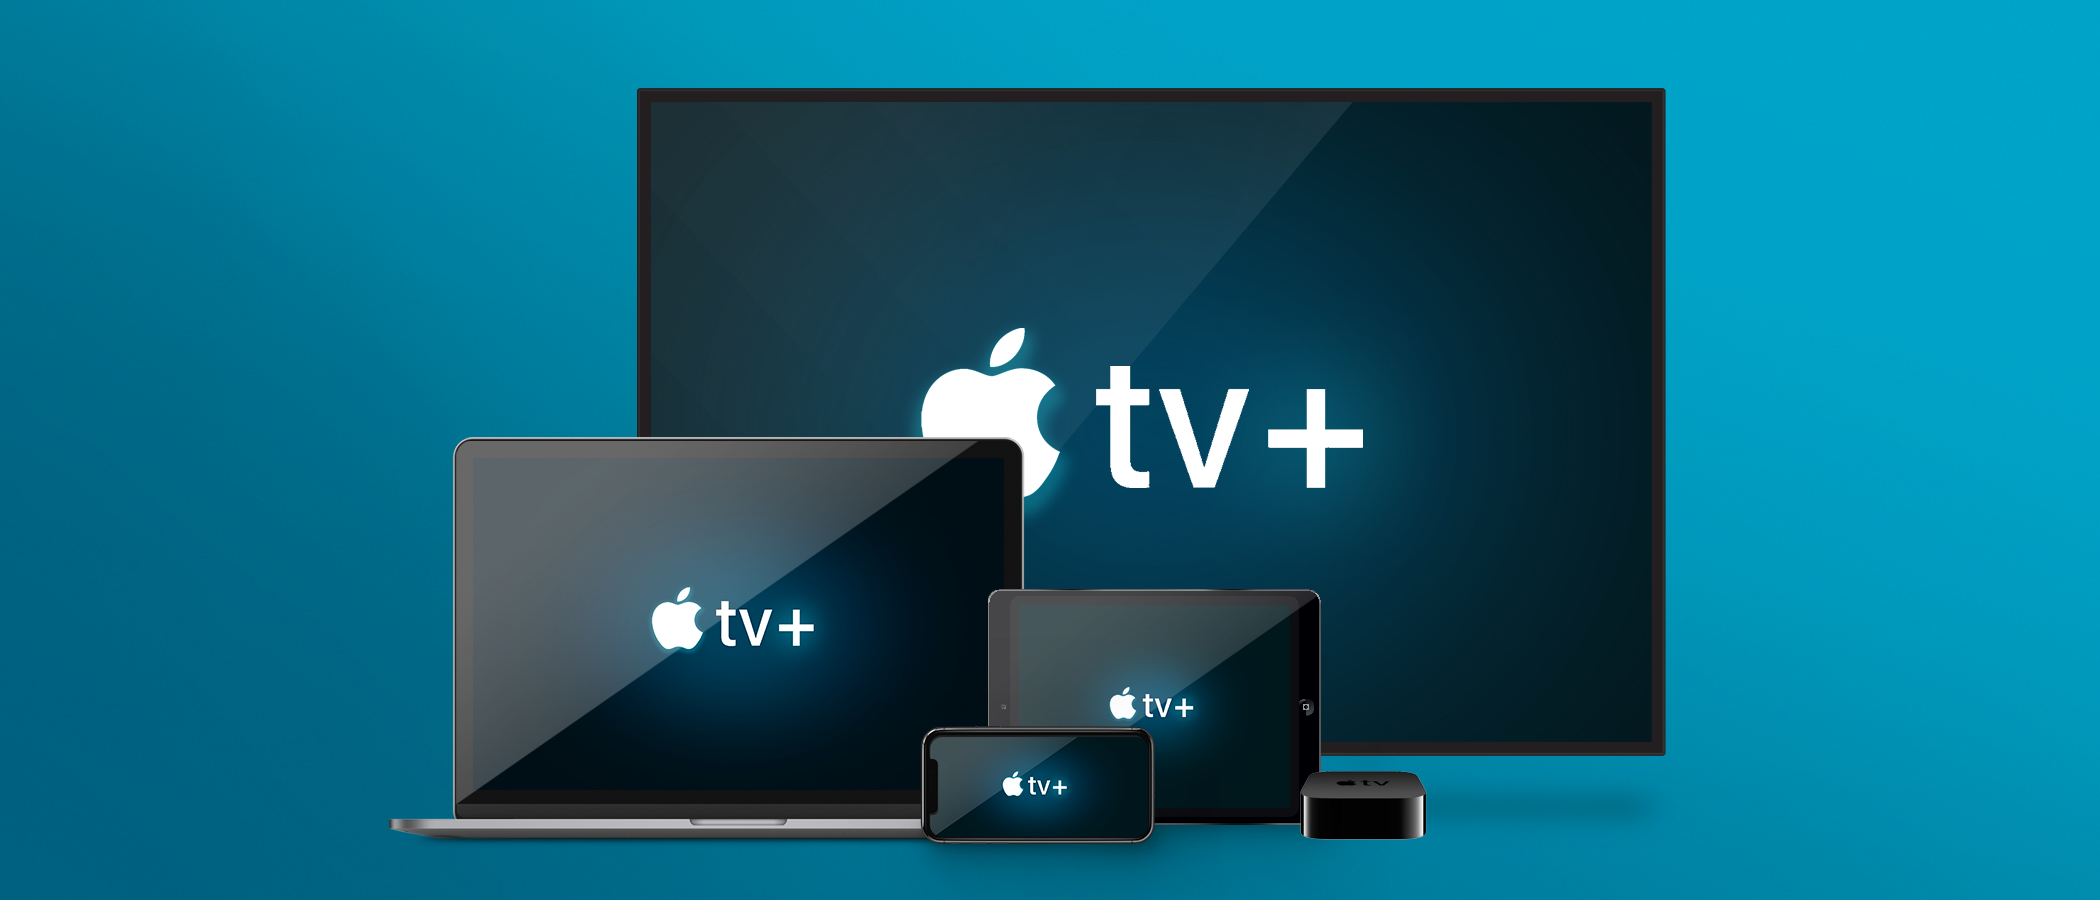 Apple TV+ supported devices